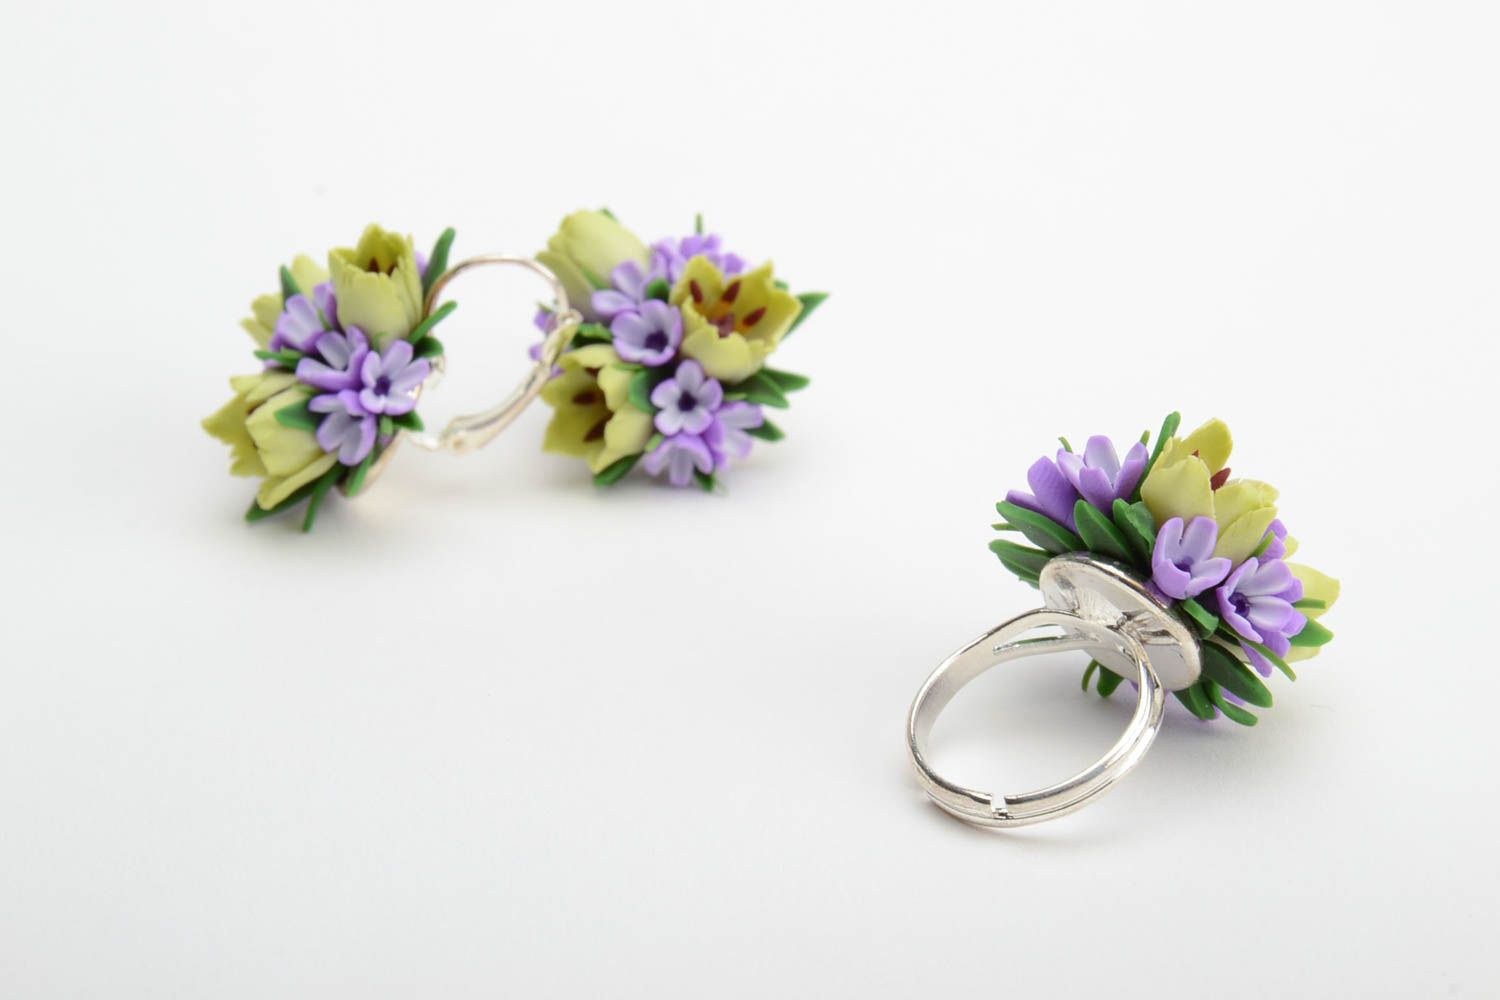 Handmade polymer clay tender violet floral jewelry set earrings and ring 2 items photo 4